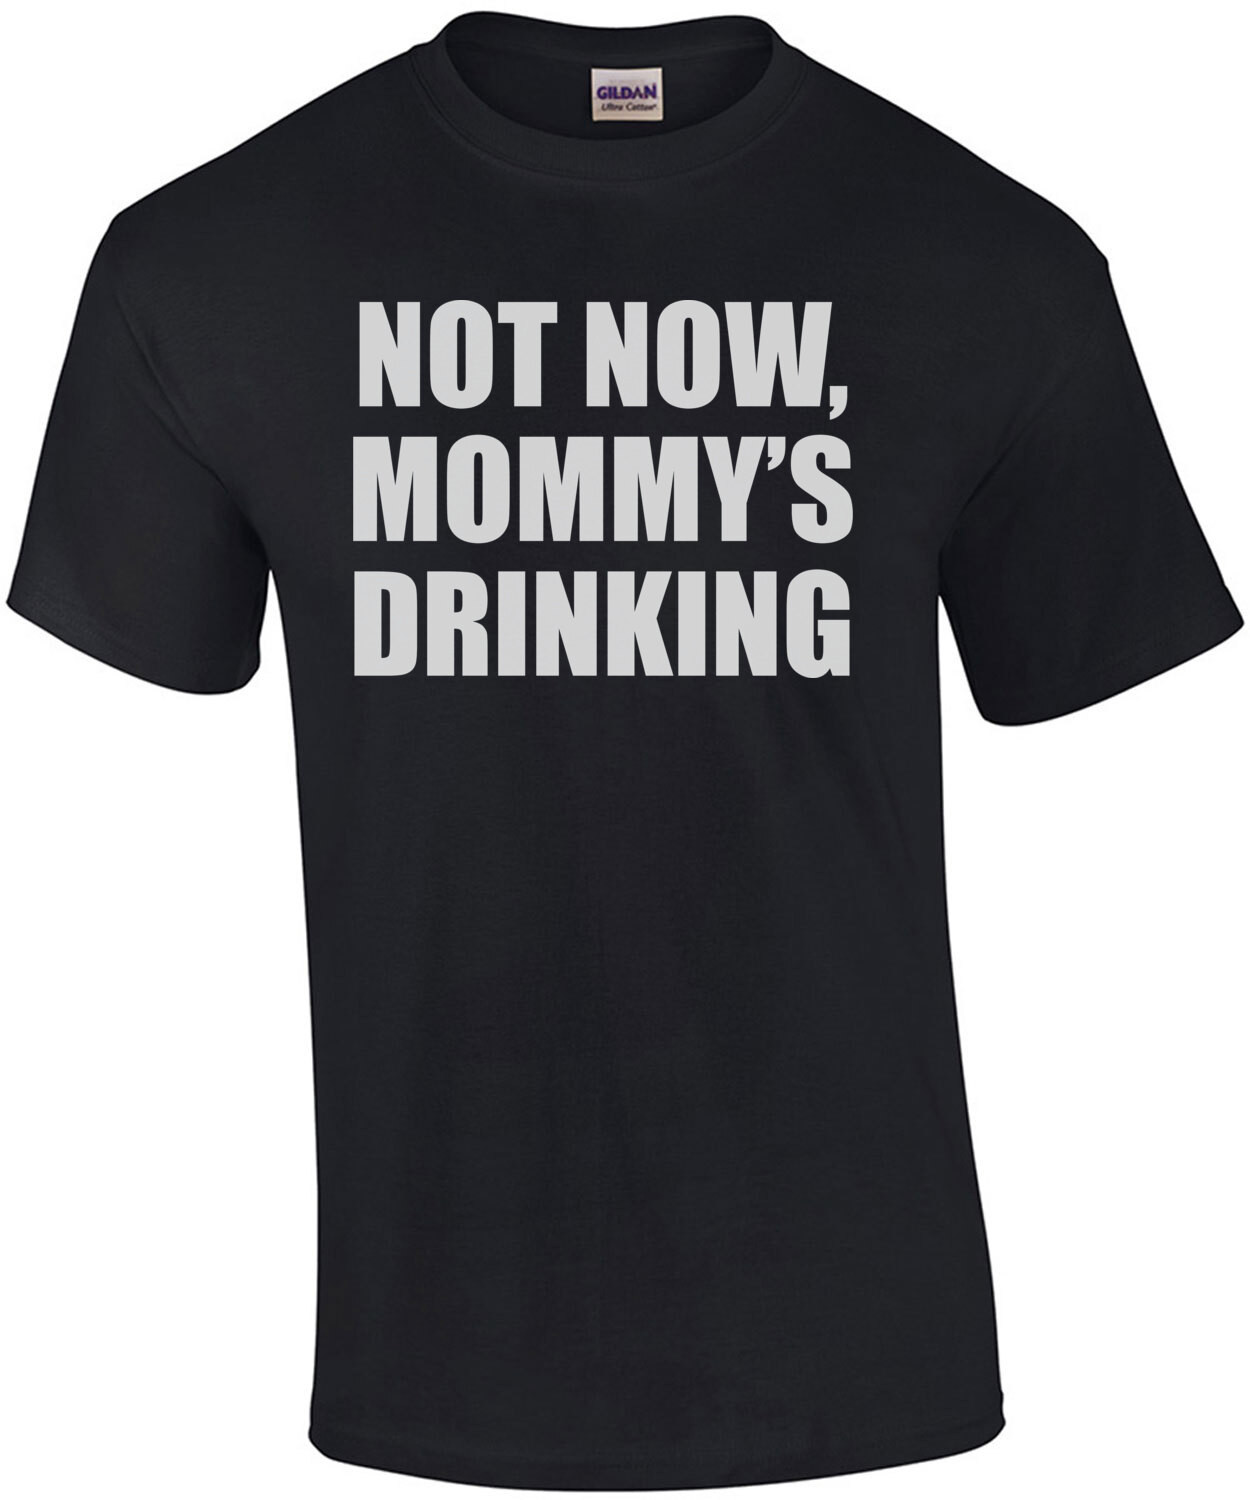 Not now, mommy's drinking. funny drinking t-shirt